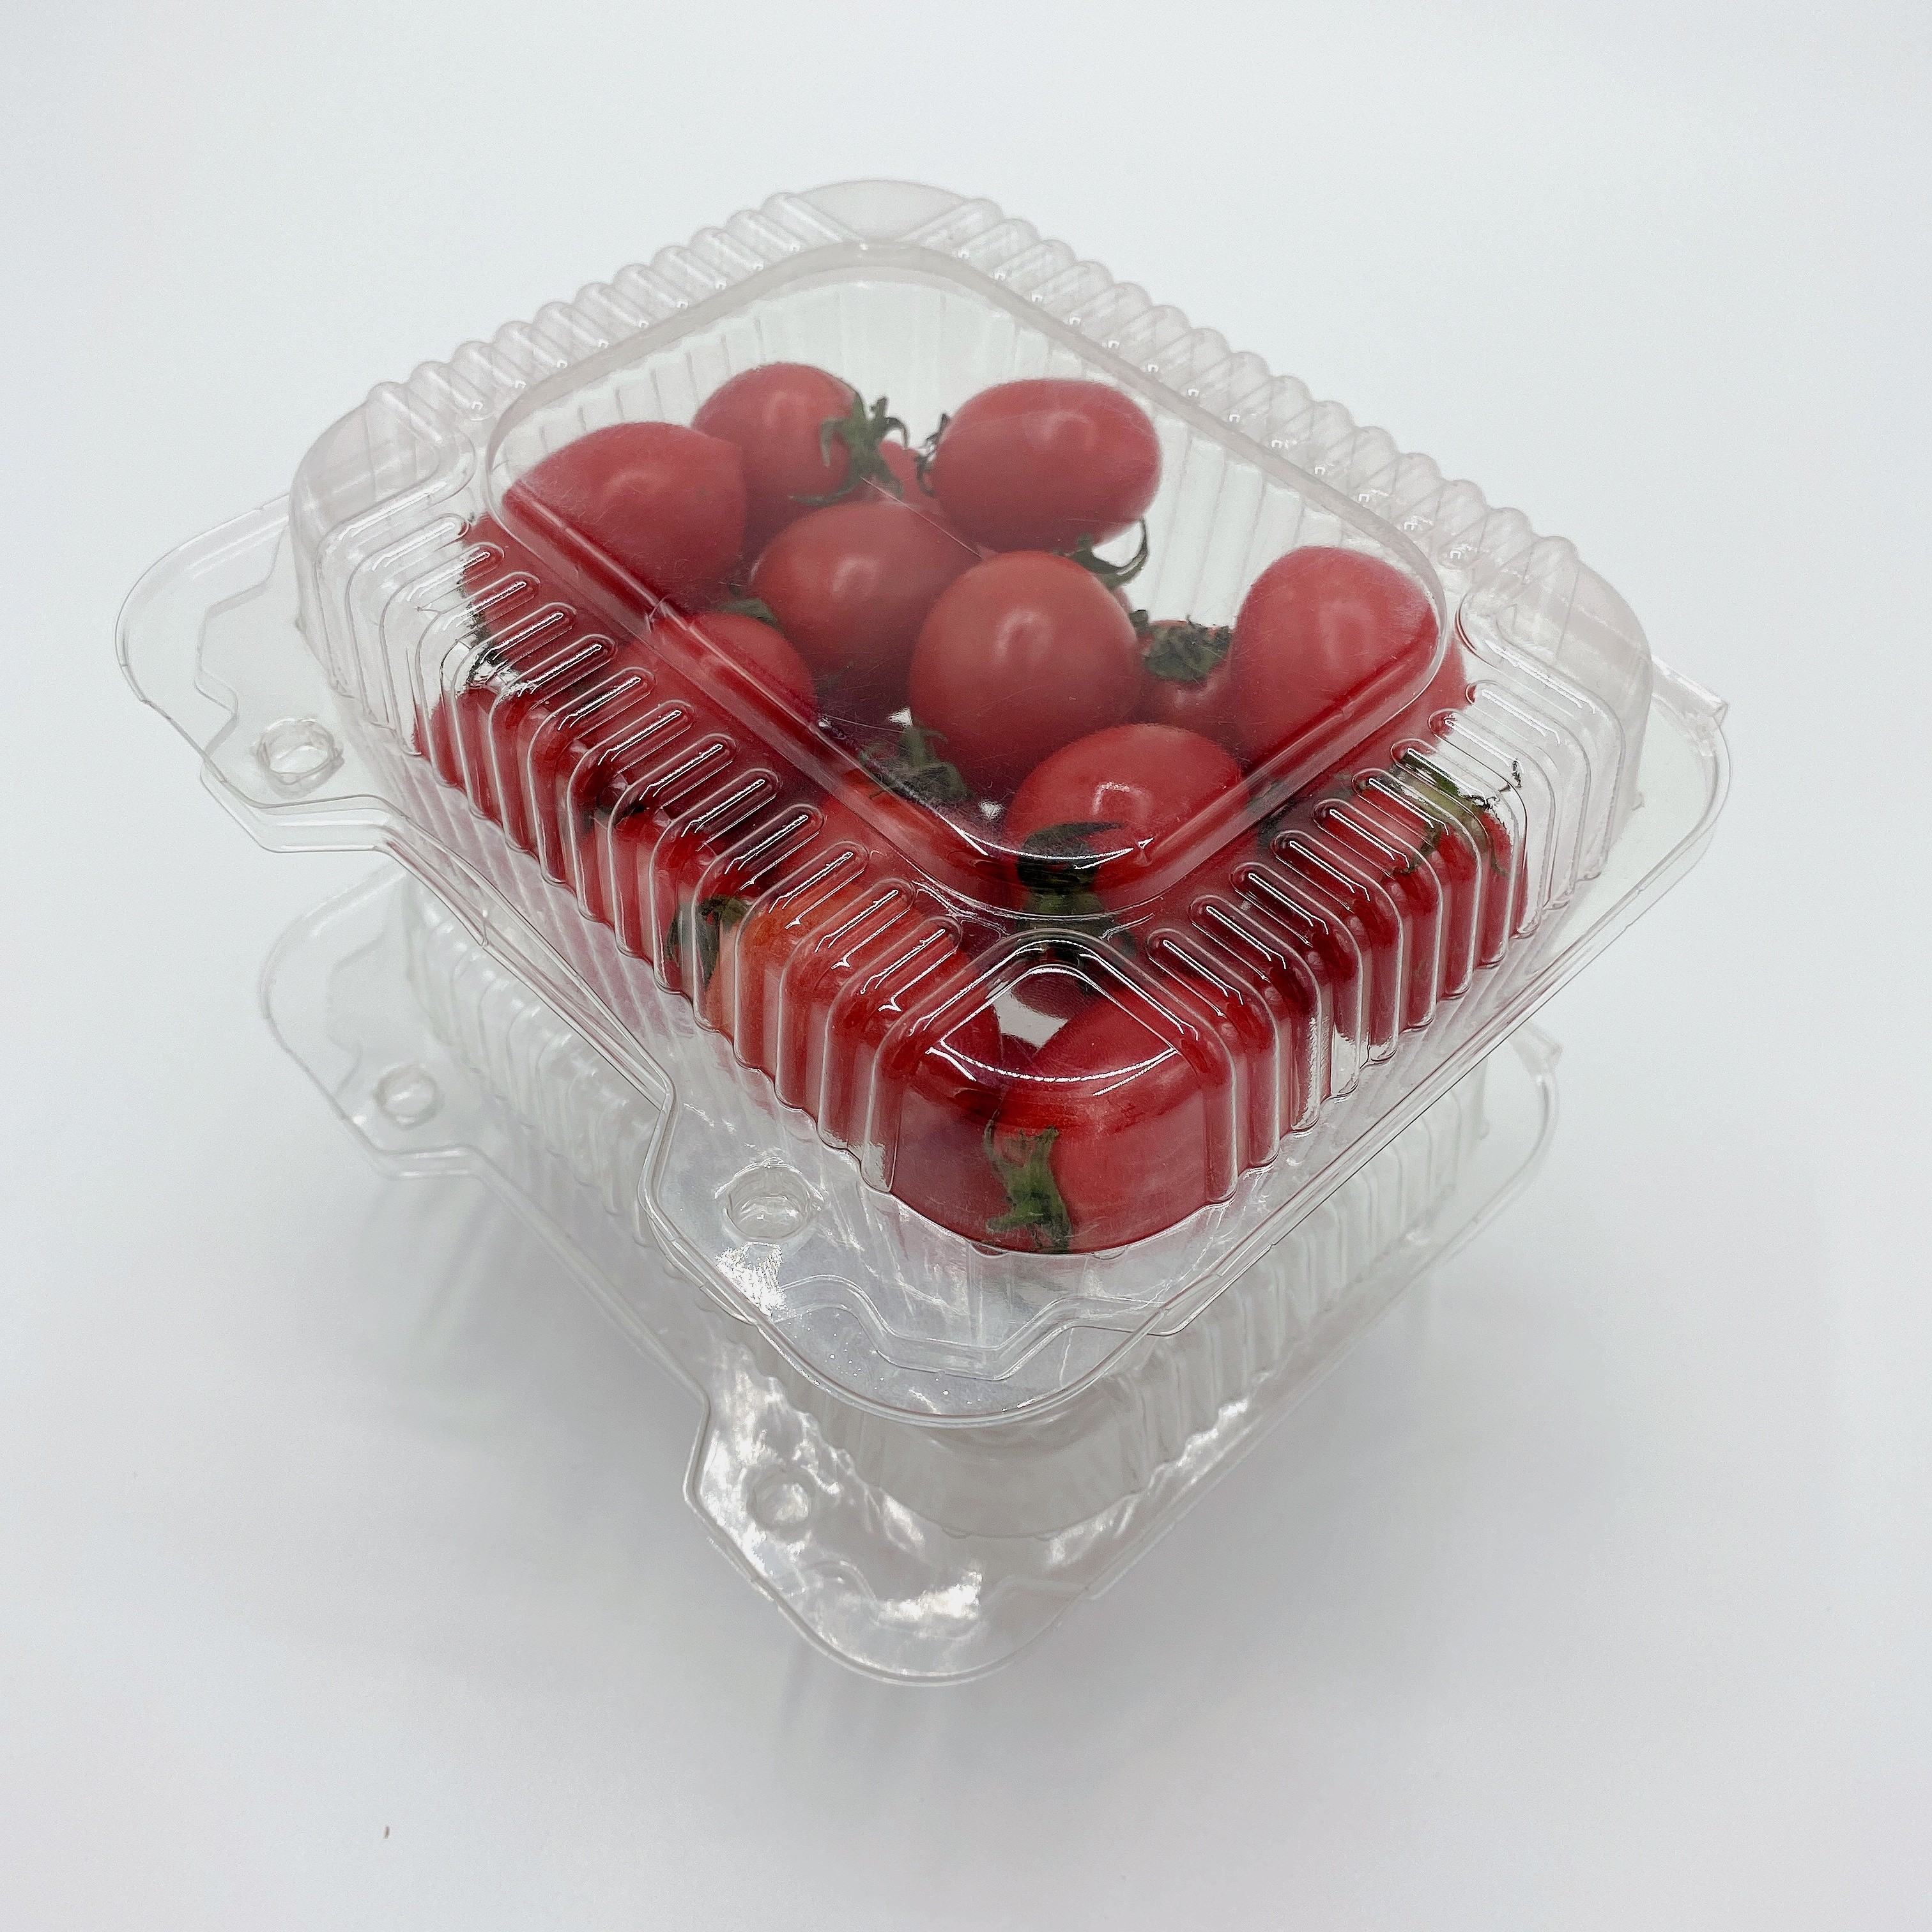 Promotional High Quality Frozen Salad Clamshell Plastic Fruit And Vegetable Tray